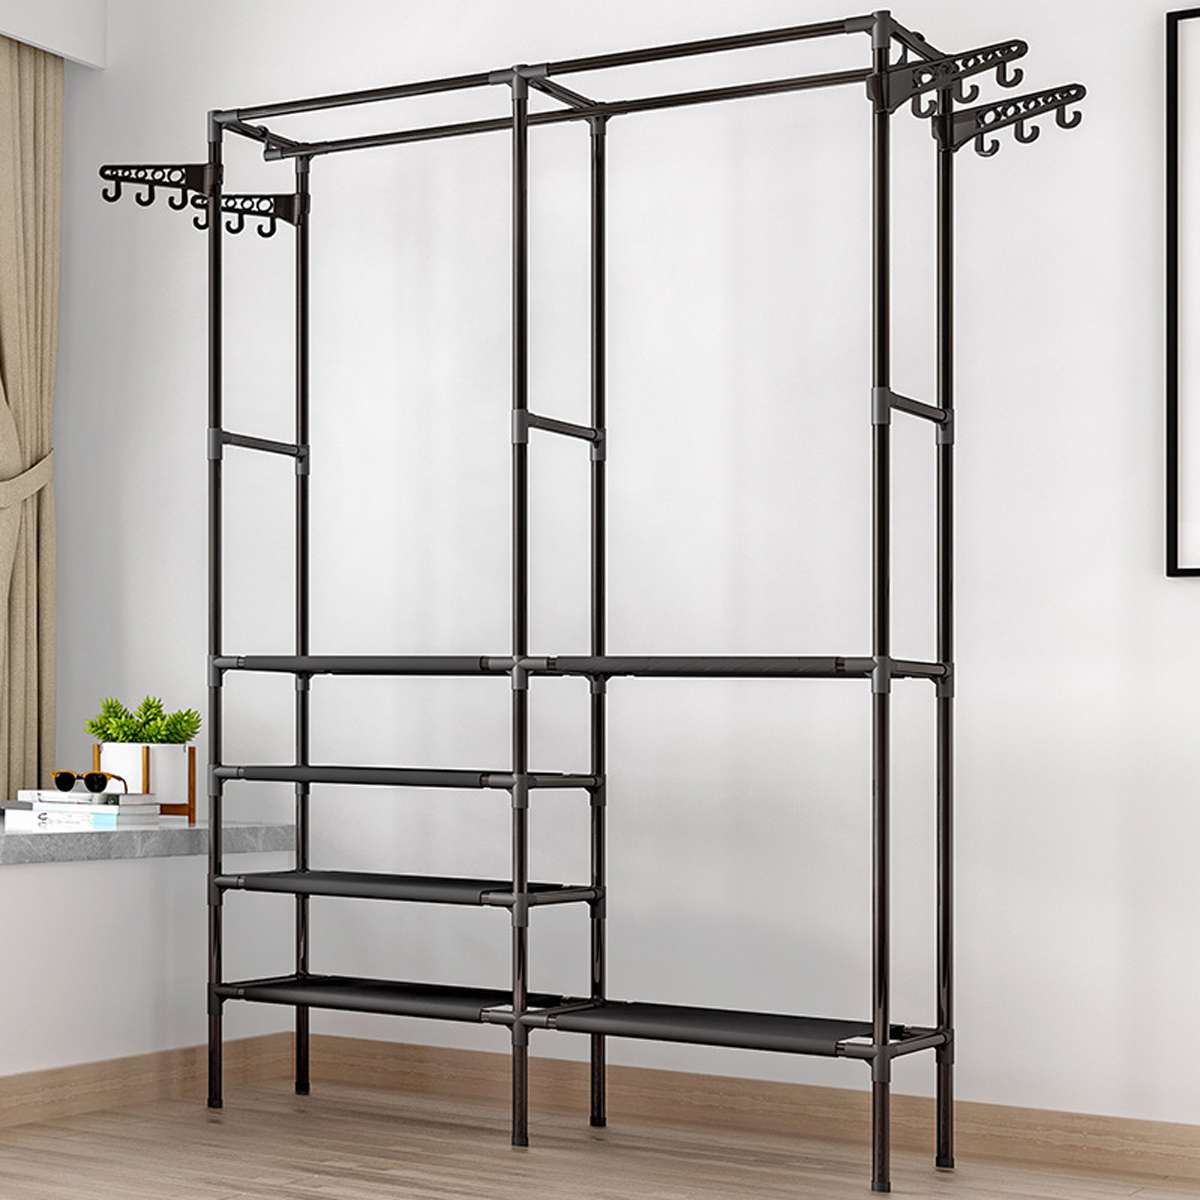 Clothes Rack Floor Standing Clothes Hanging Colorful Storage Shelf Clothes Hanger Racks Couple Simple Style Bedroom Furniture